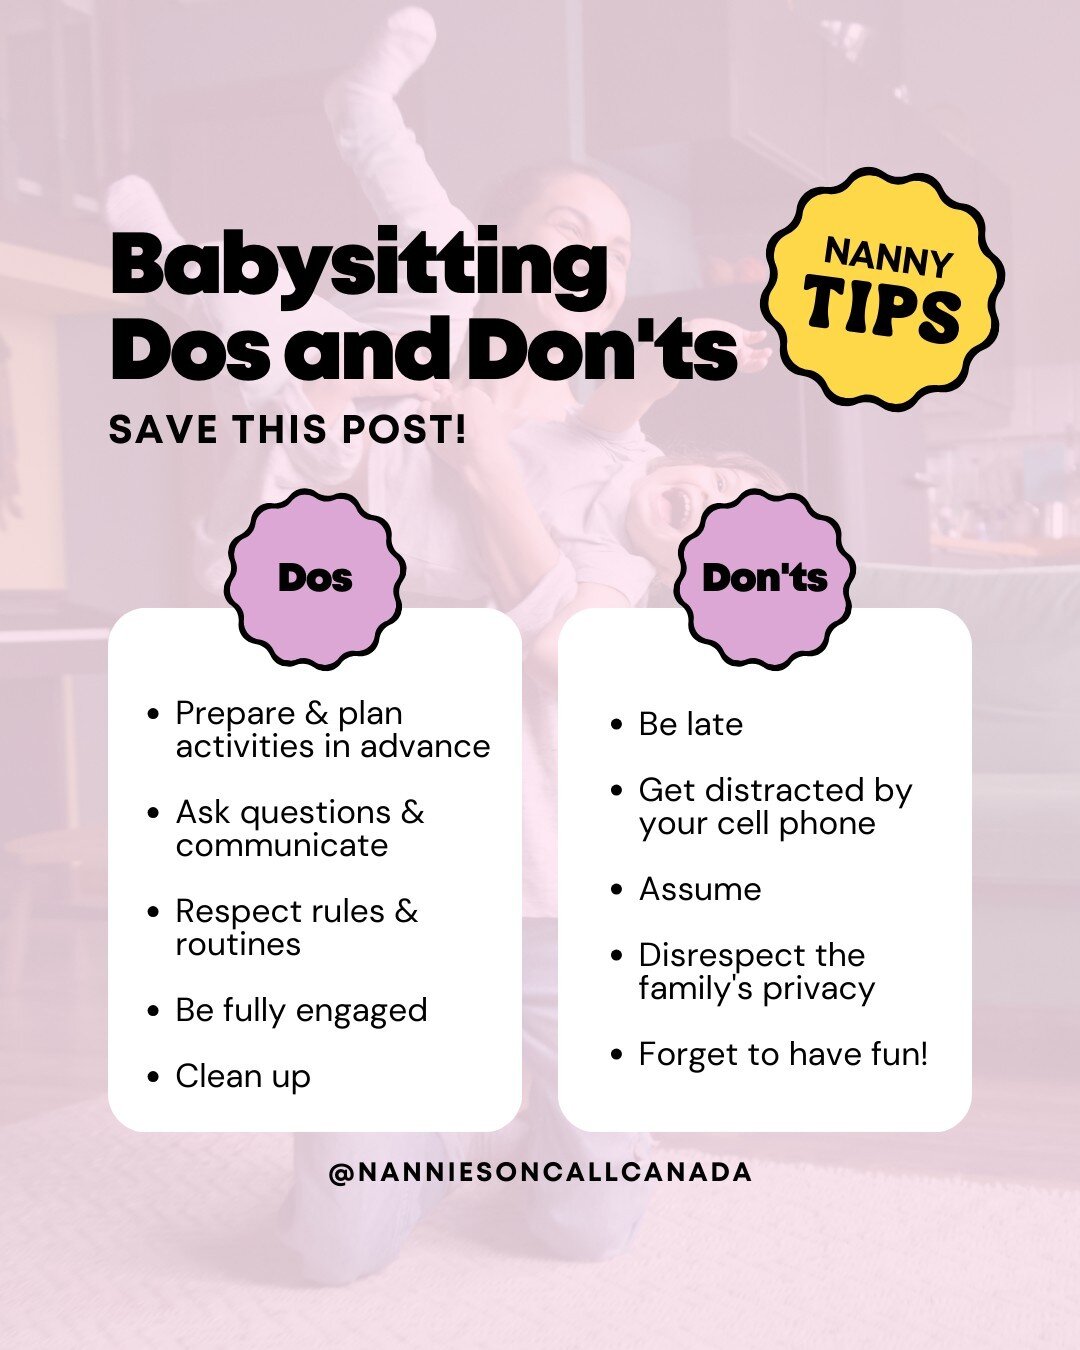 👉🏼 SAVE this post if you're starting out as an occasional nanny!⁠
⁠
Here are the dos and don'ts of babysitting that will allow you to stand out and make your mark with the families you serve:⁠
⁠
- Arrive on time, every time.⁠
⁠
- Plan age-appropria